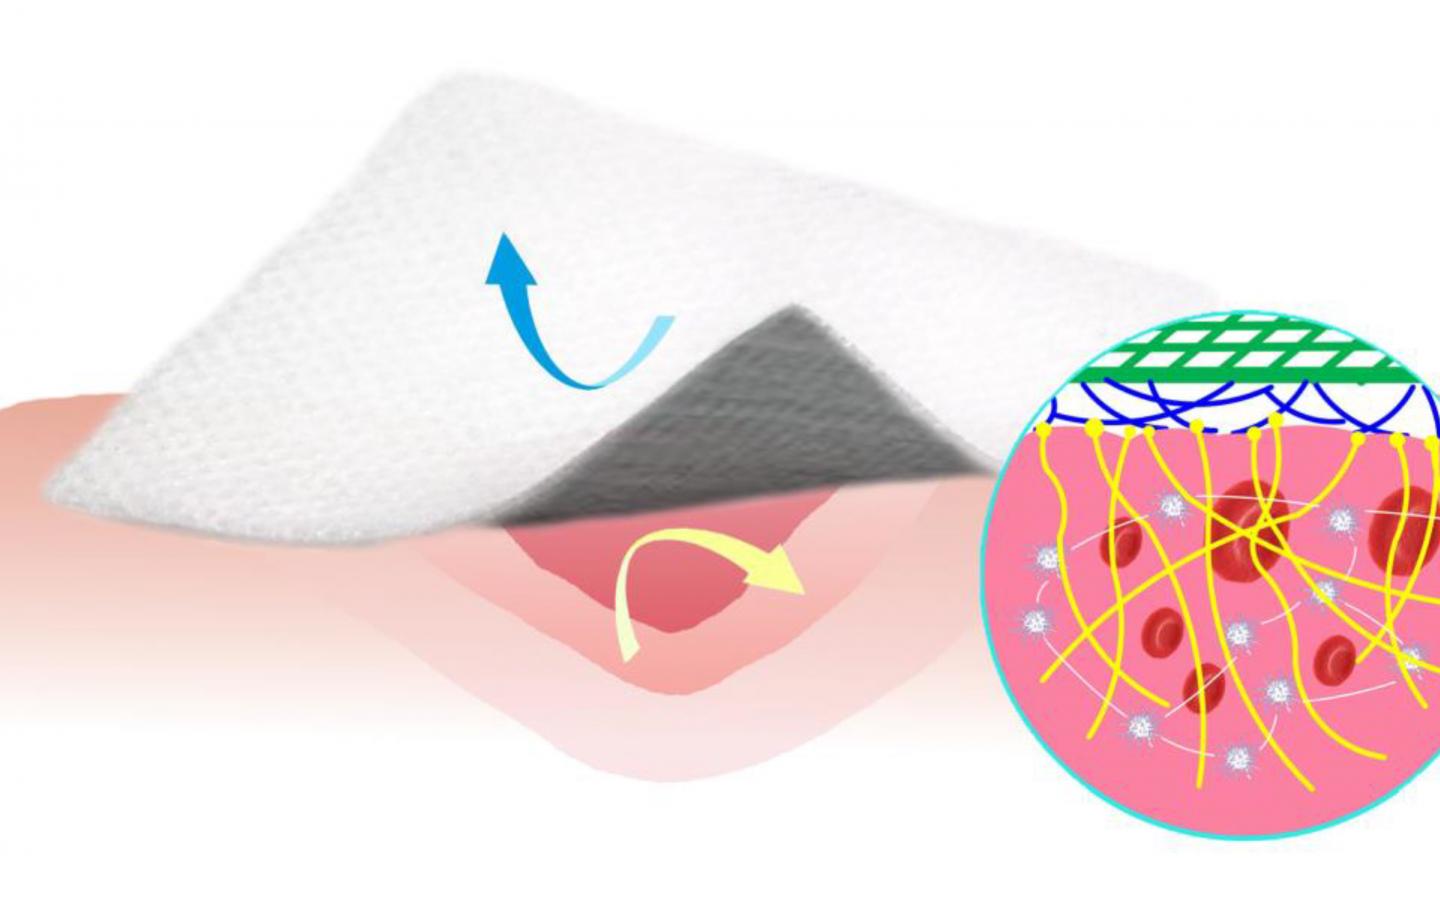 Promotes healing and can subsequently be easliy removed: a new kind of bandage coated with silicone and carbon nanofibers. Source: Li Z et al. Nature Communications 2019